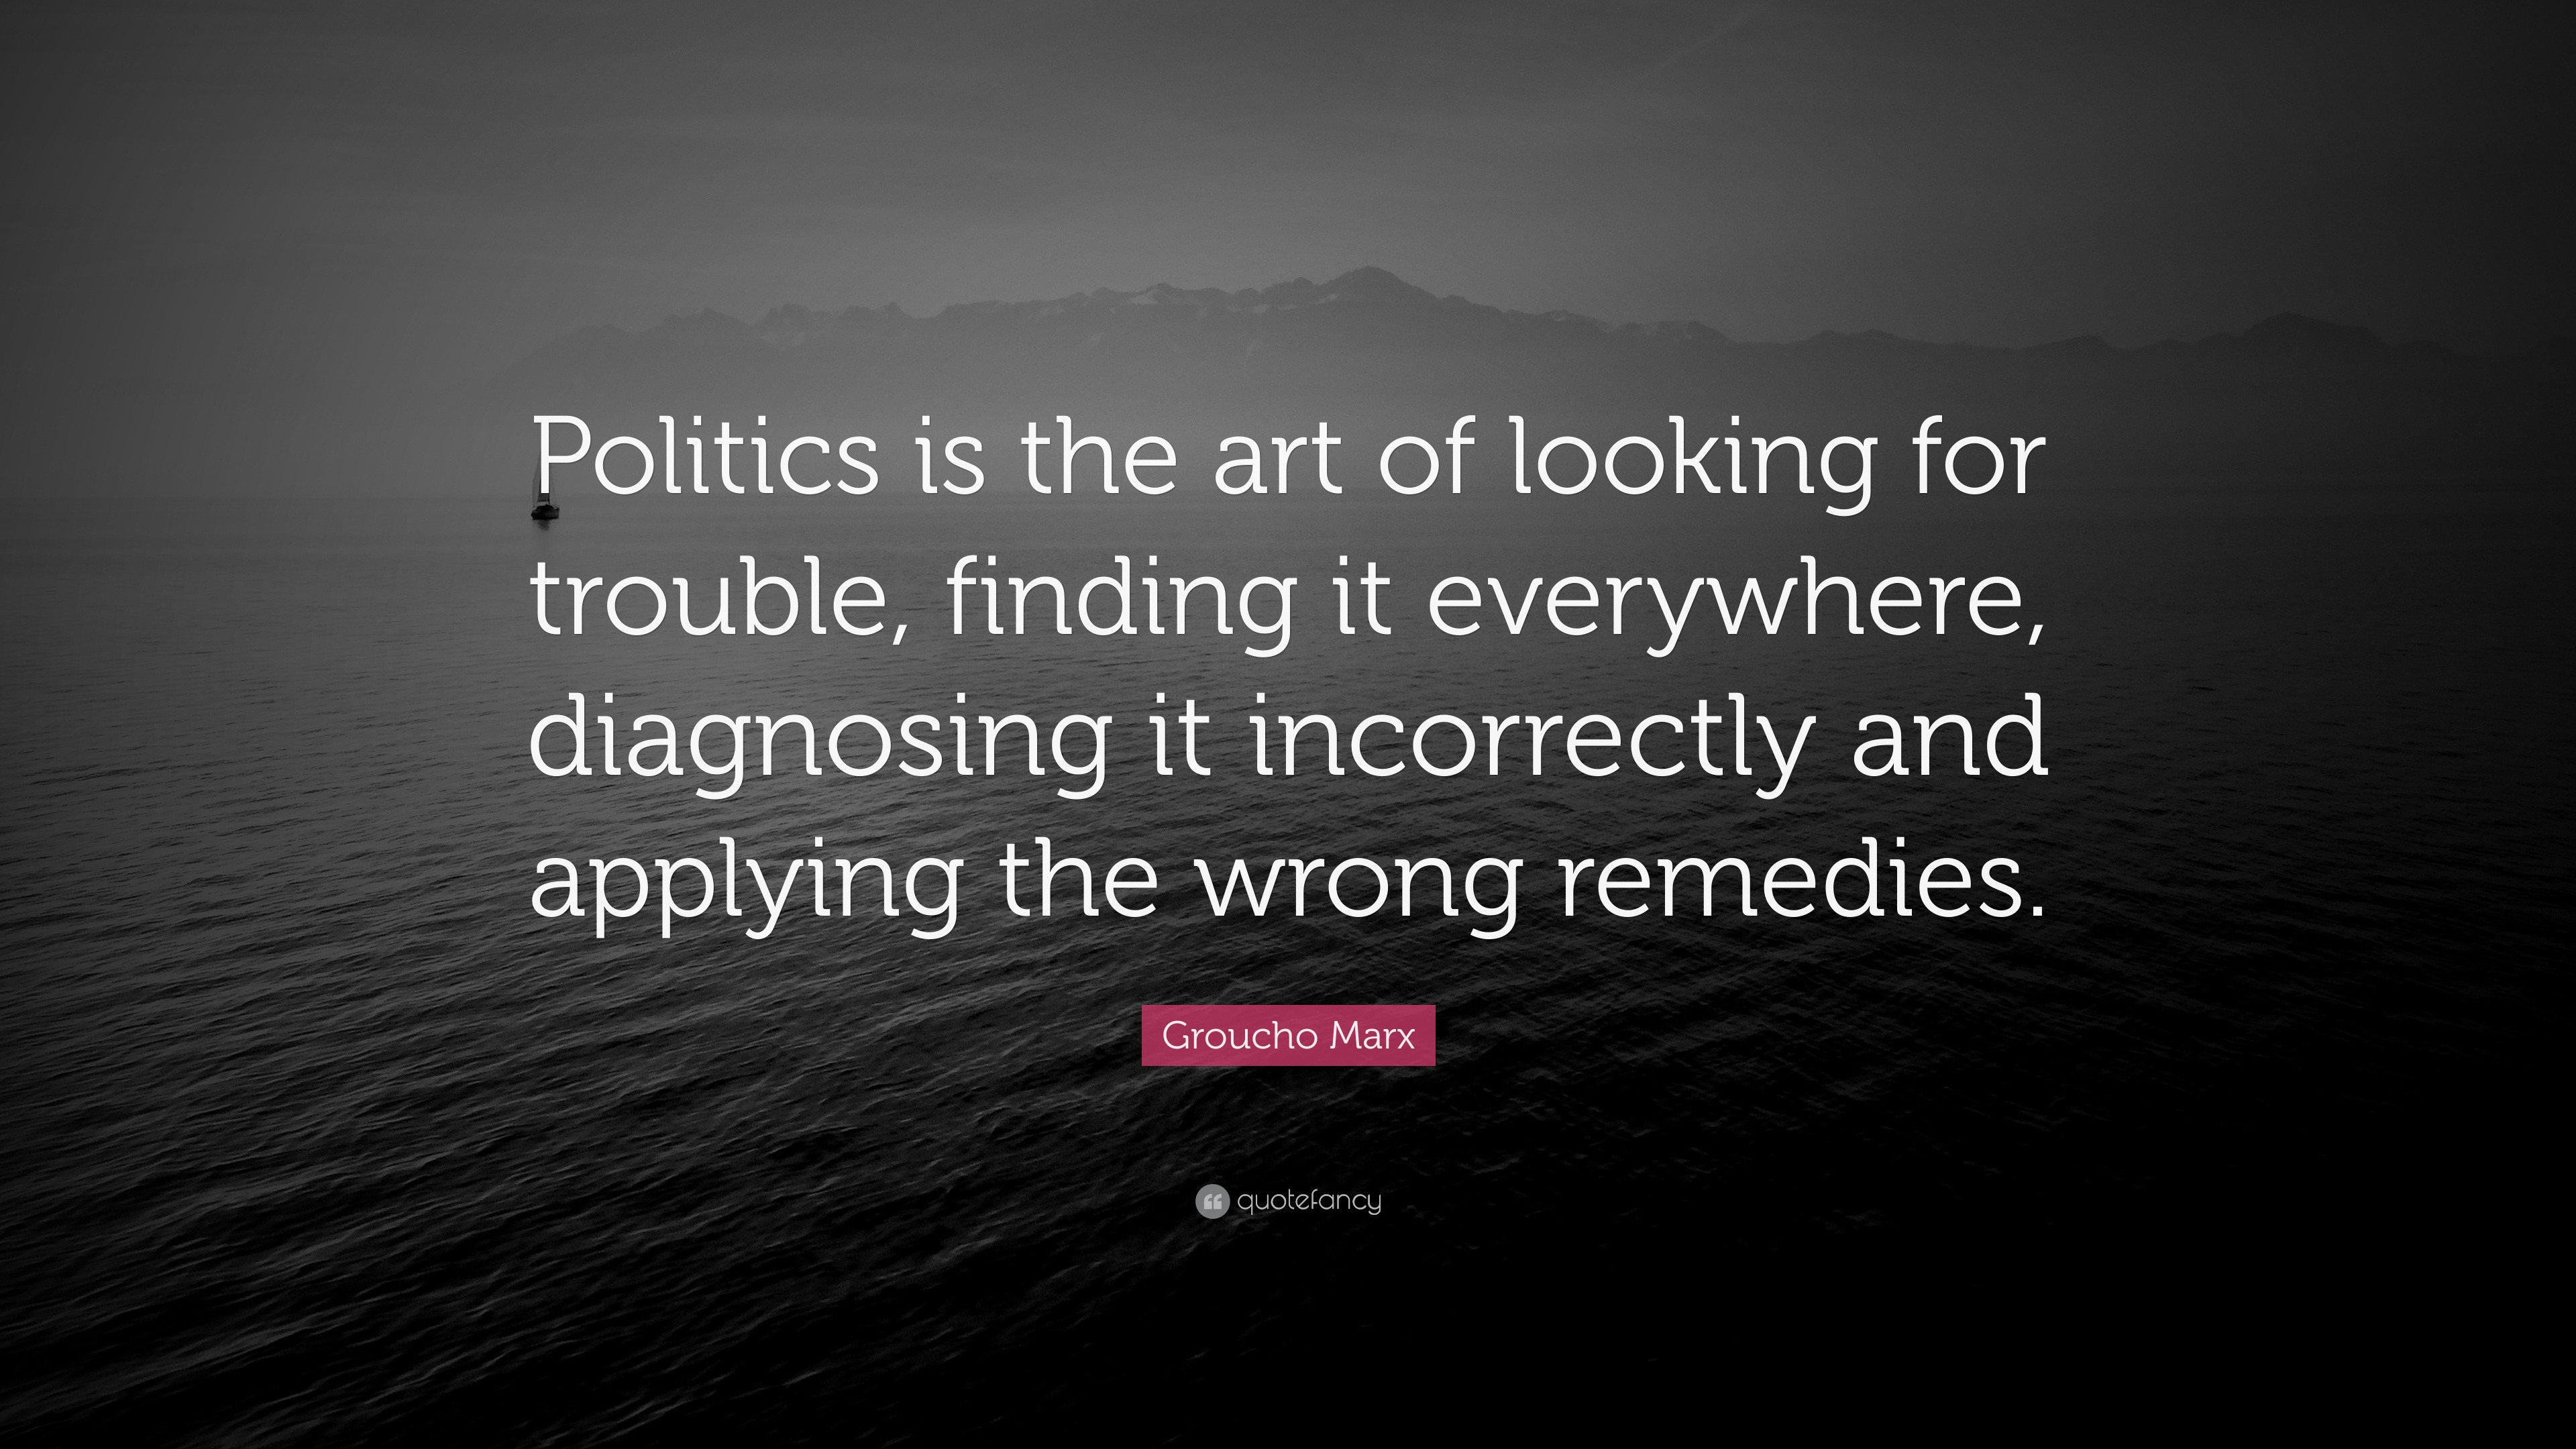 2268895 Groucho Marx Quote Politics is the art of looking for trouble